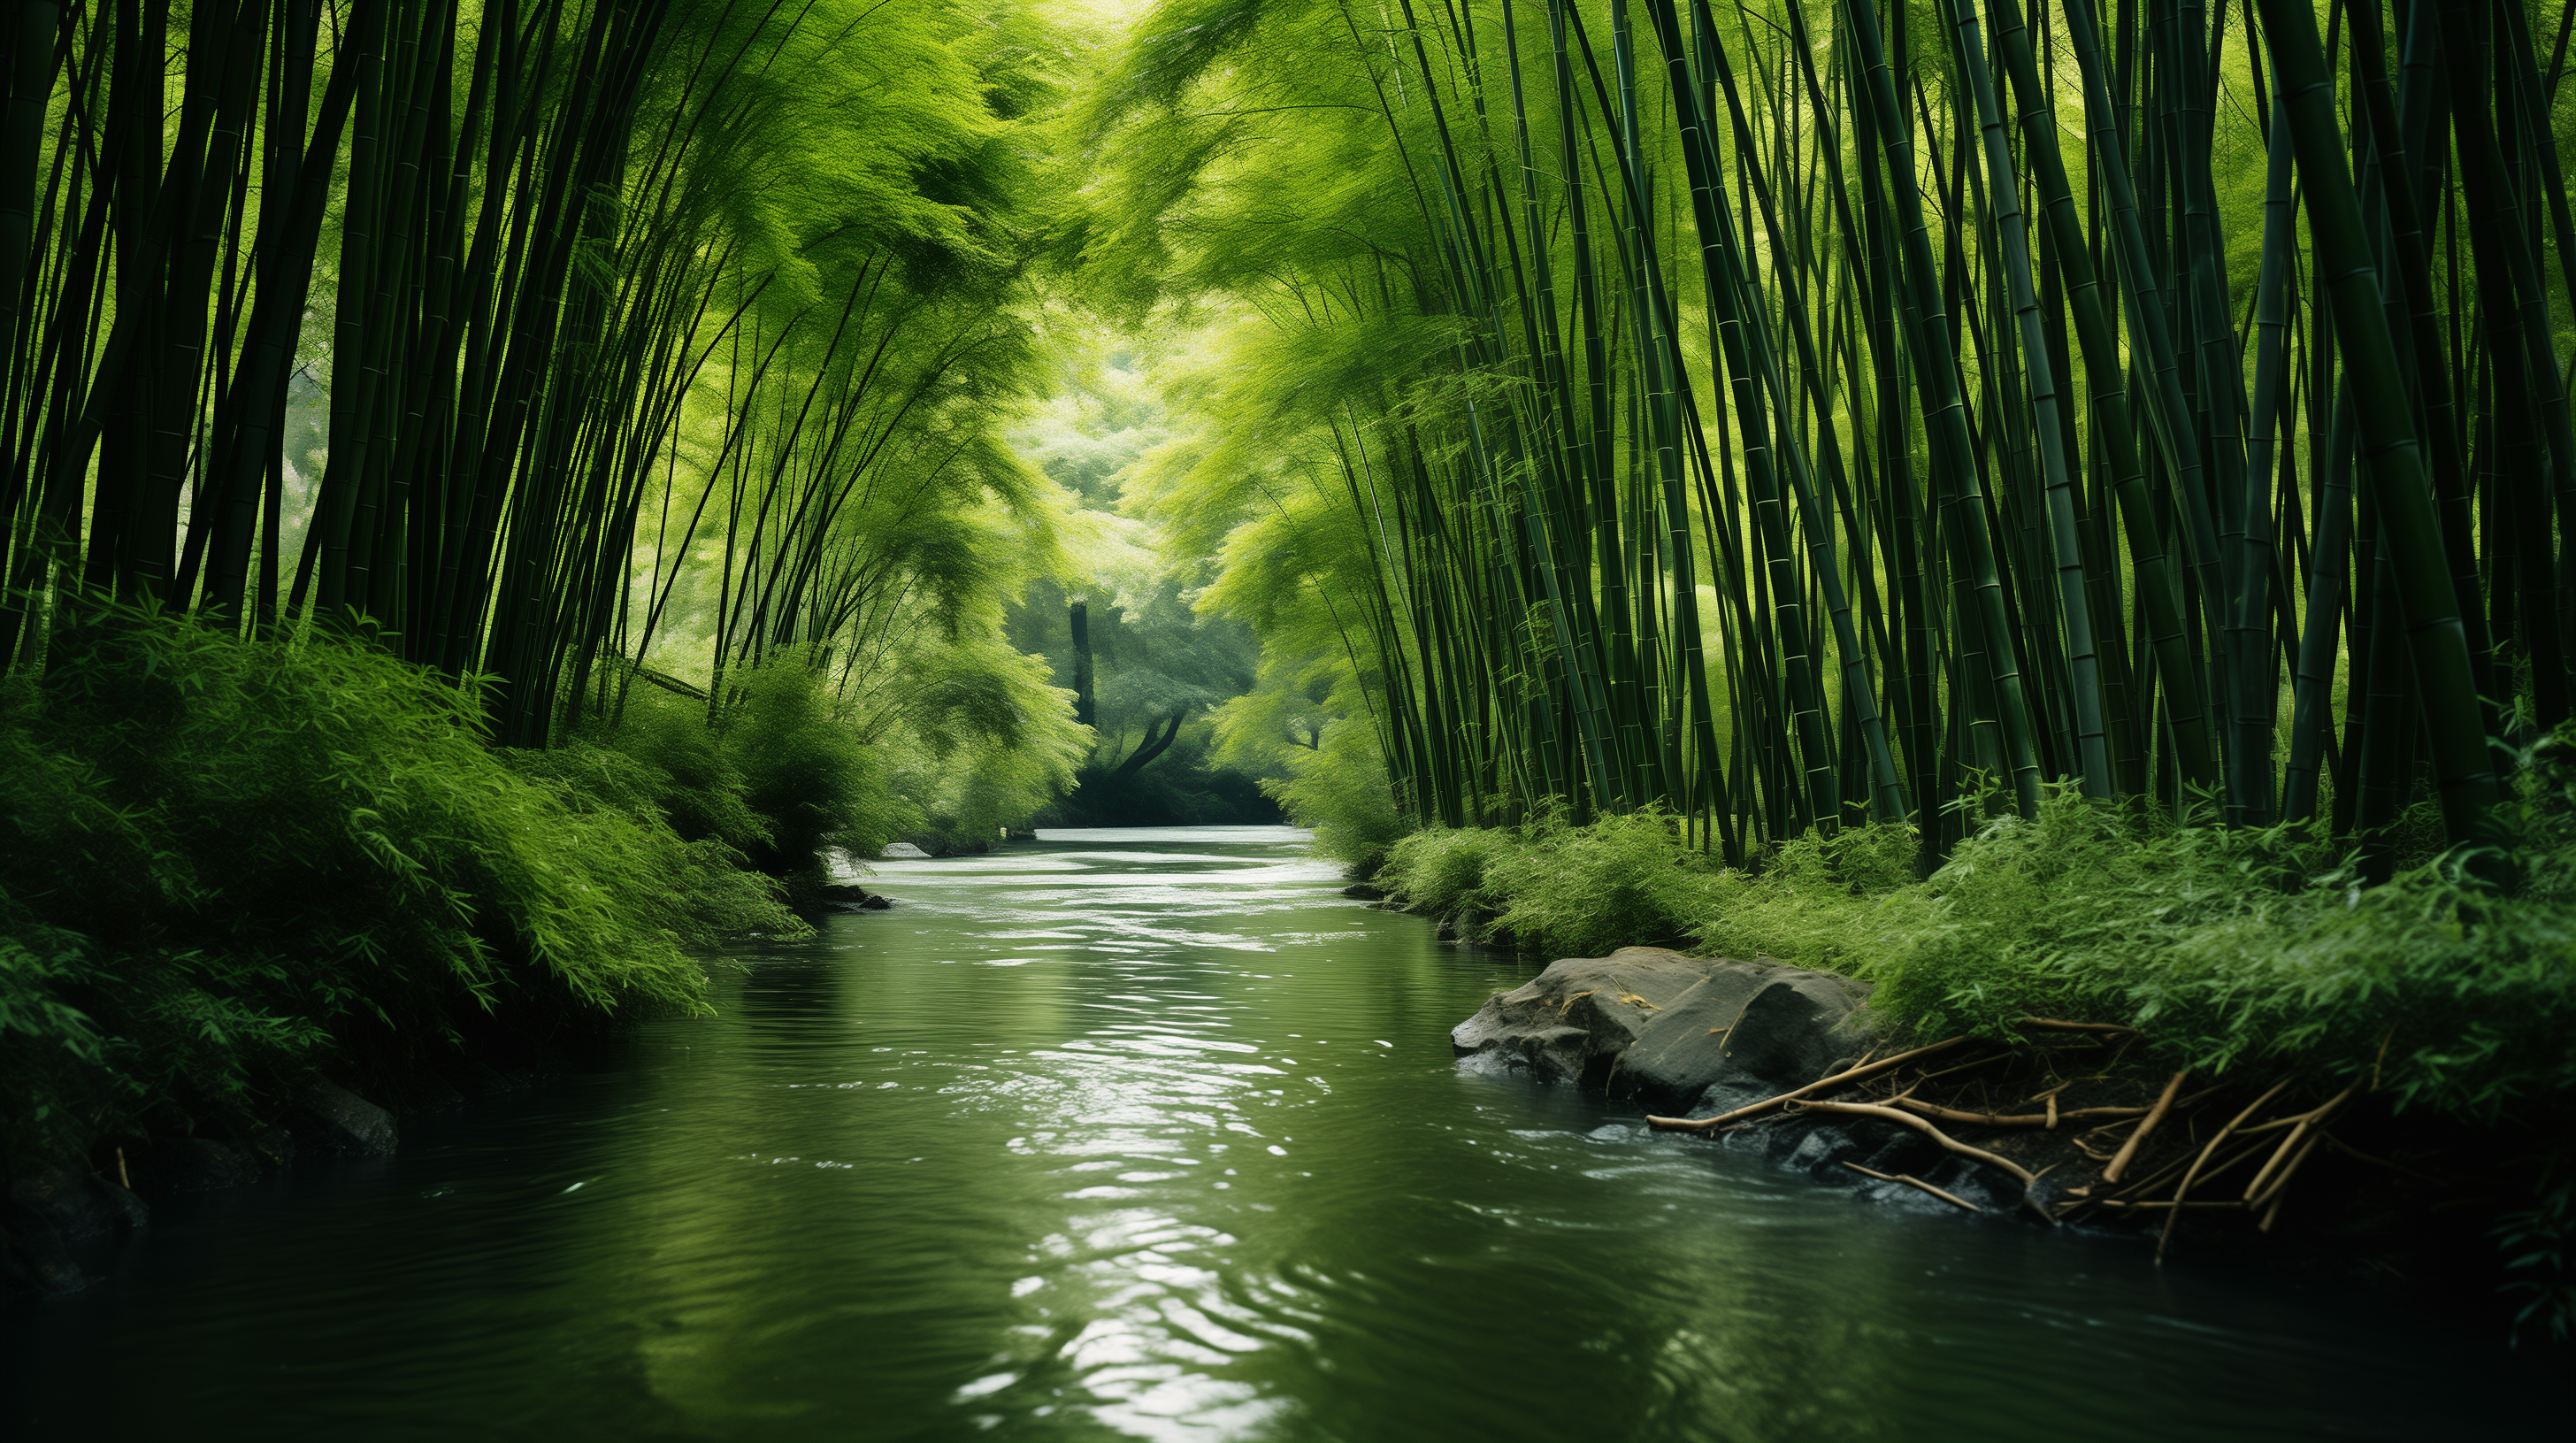 Enchanting Bamboo Forest River HD Wallpaper By Laxmonaut